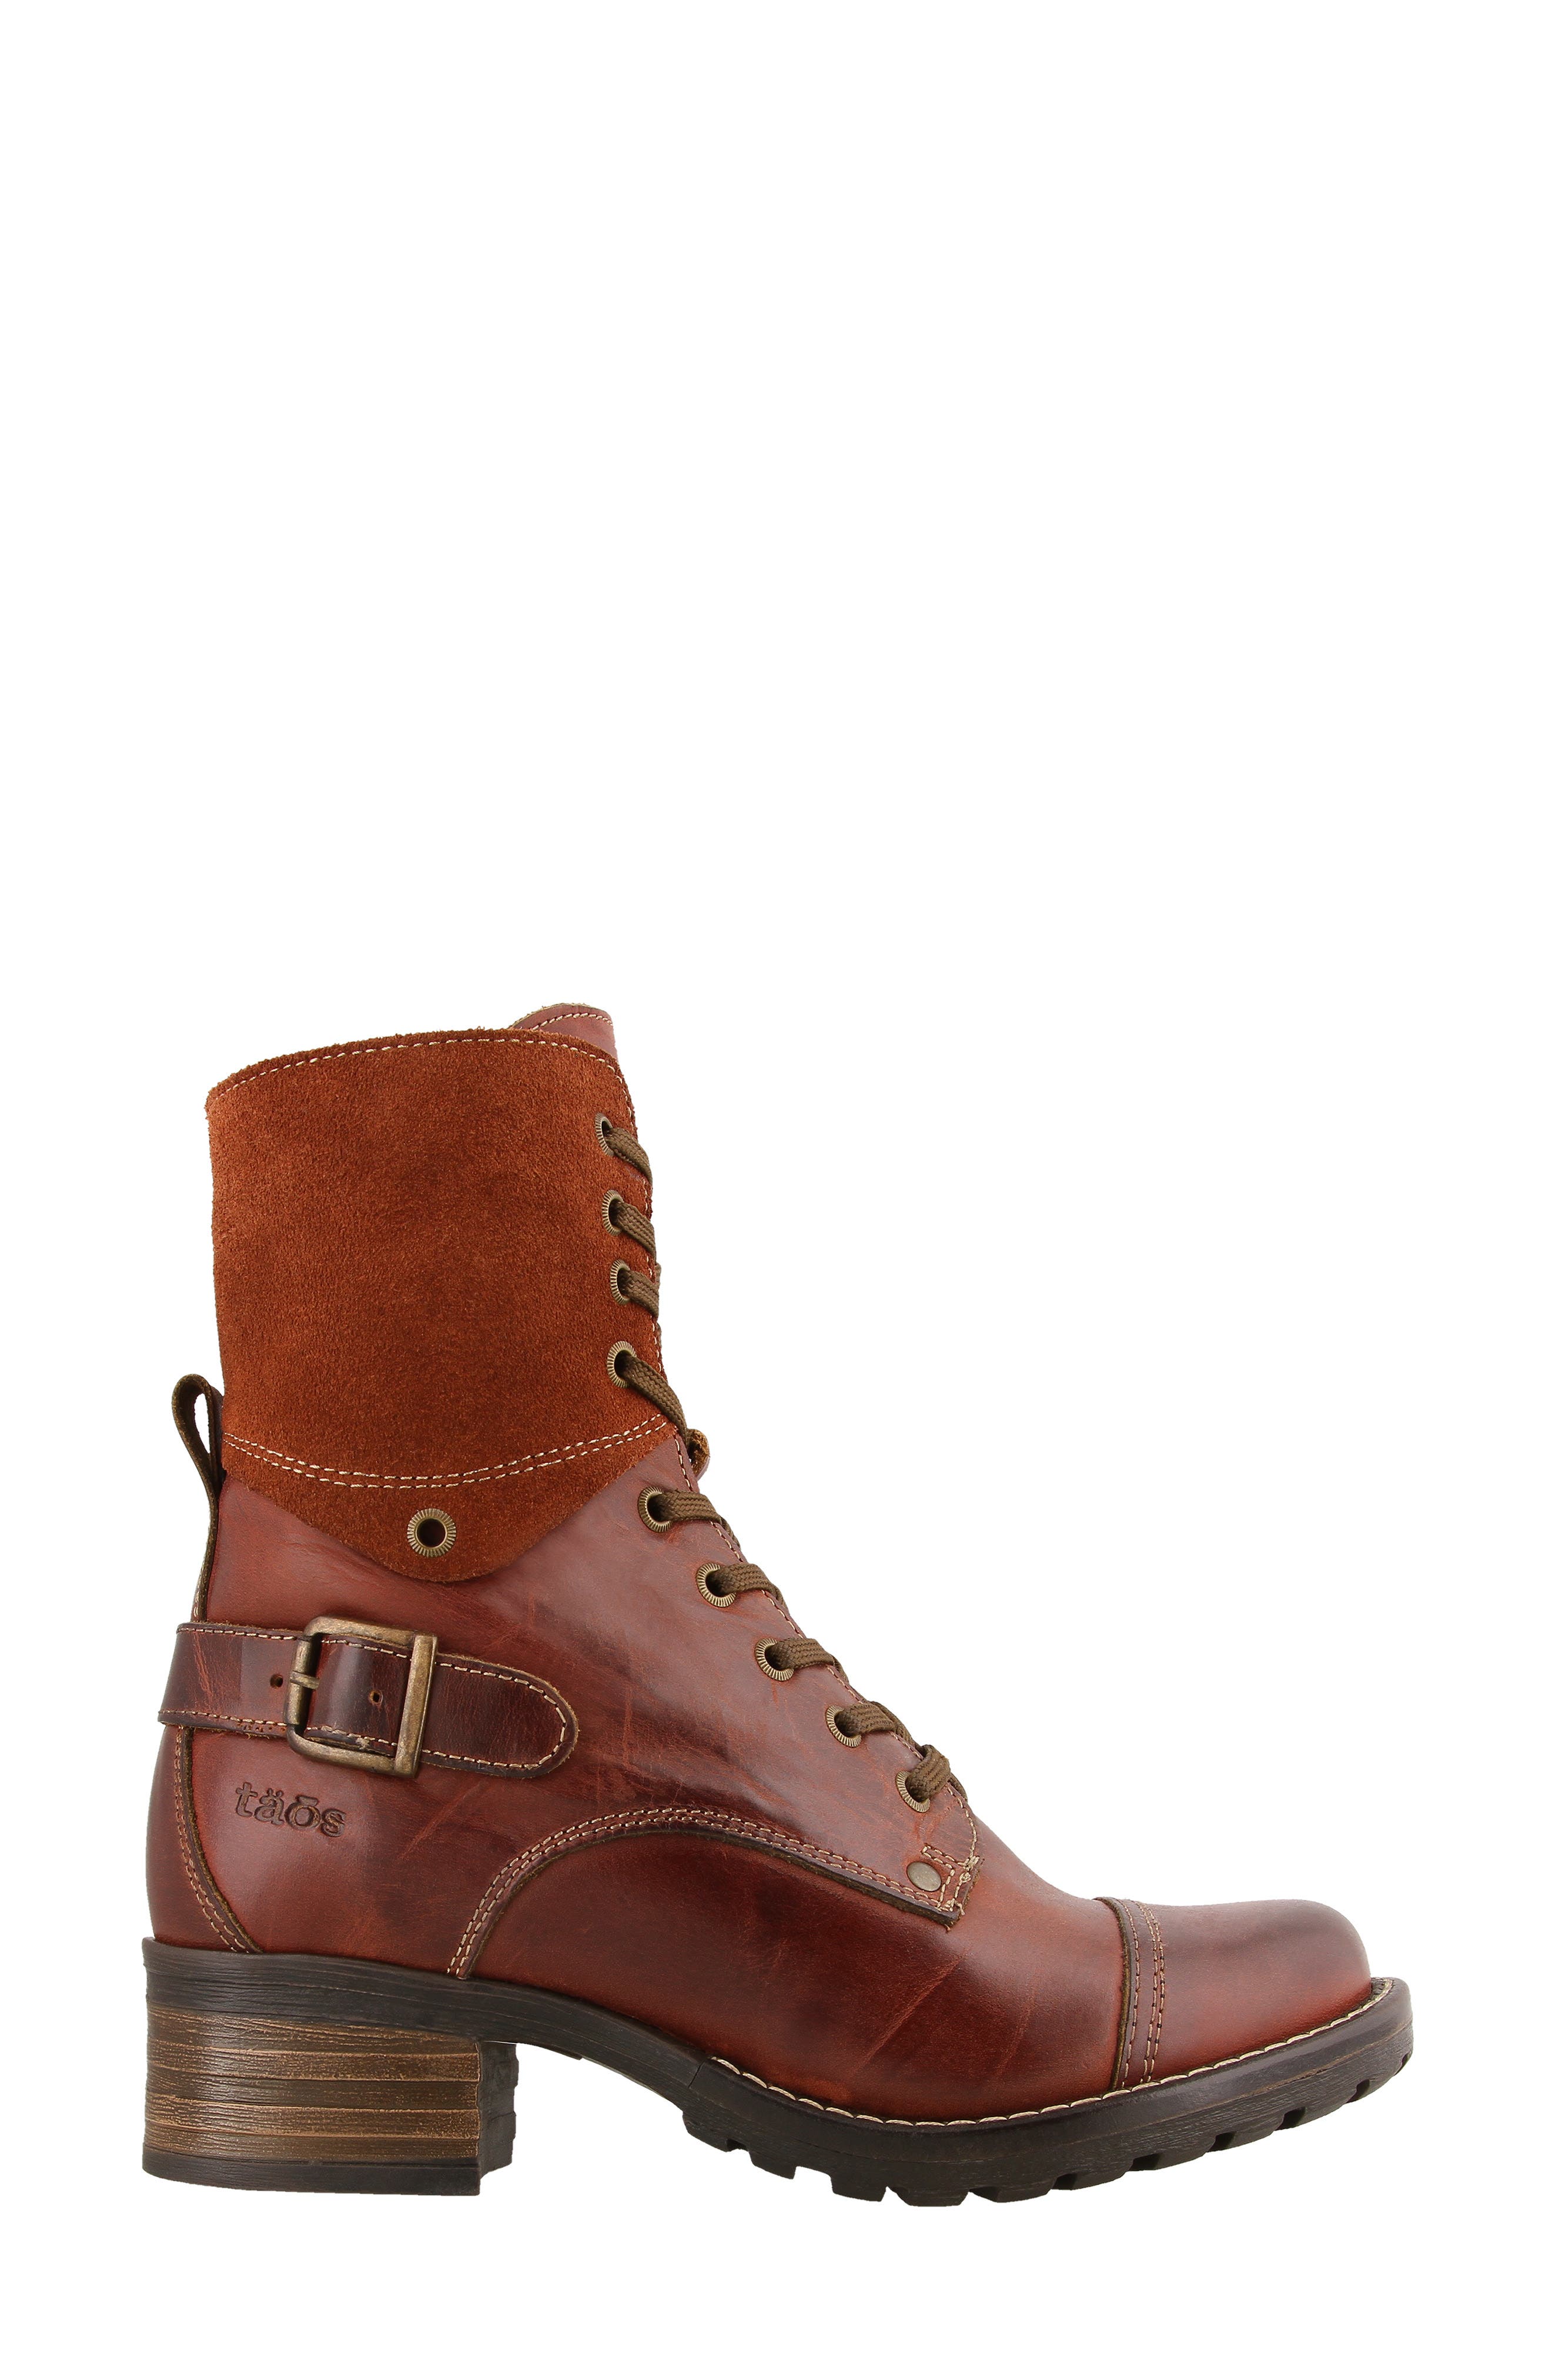 taos lace up boots